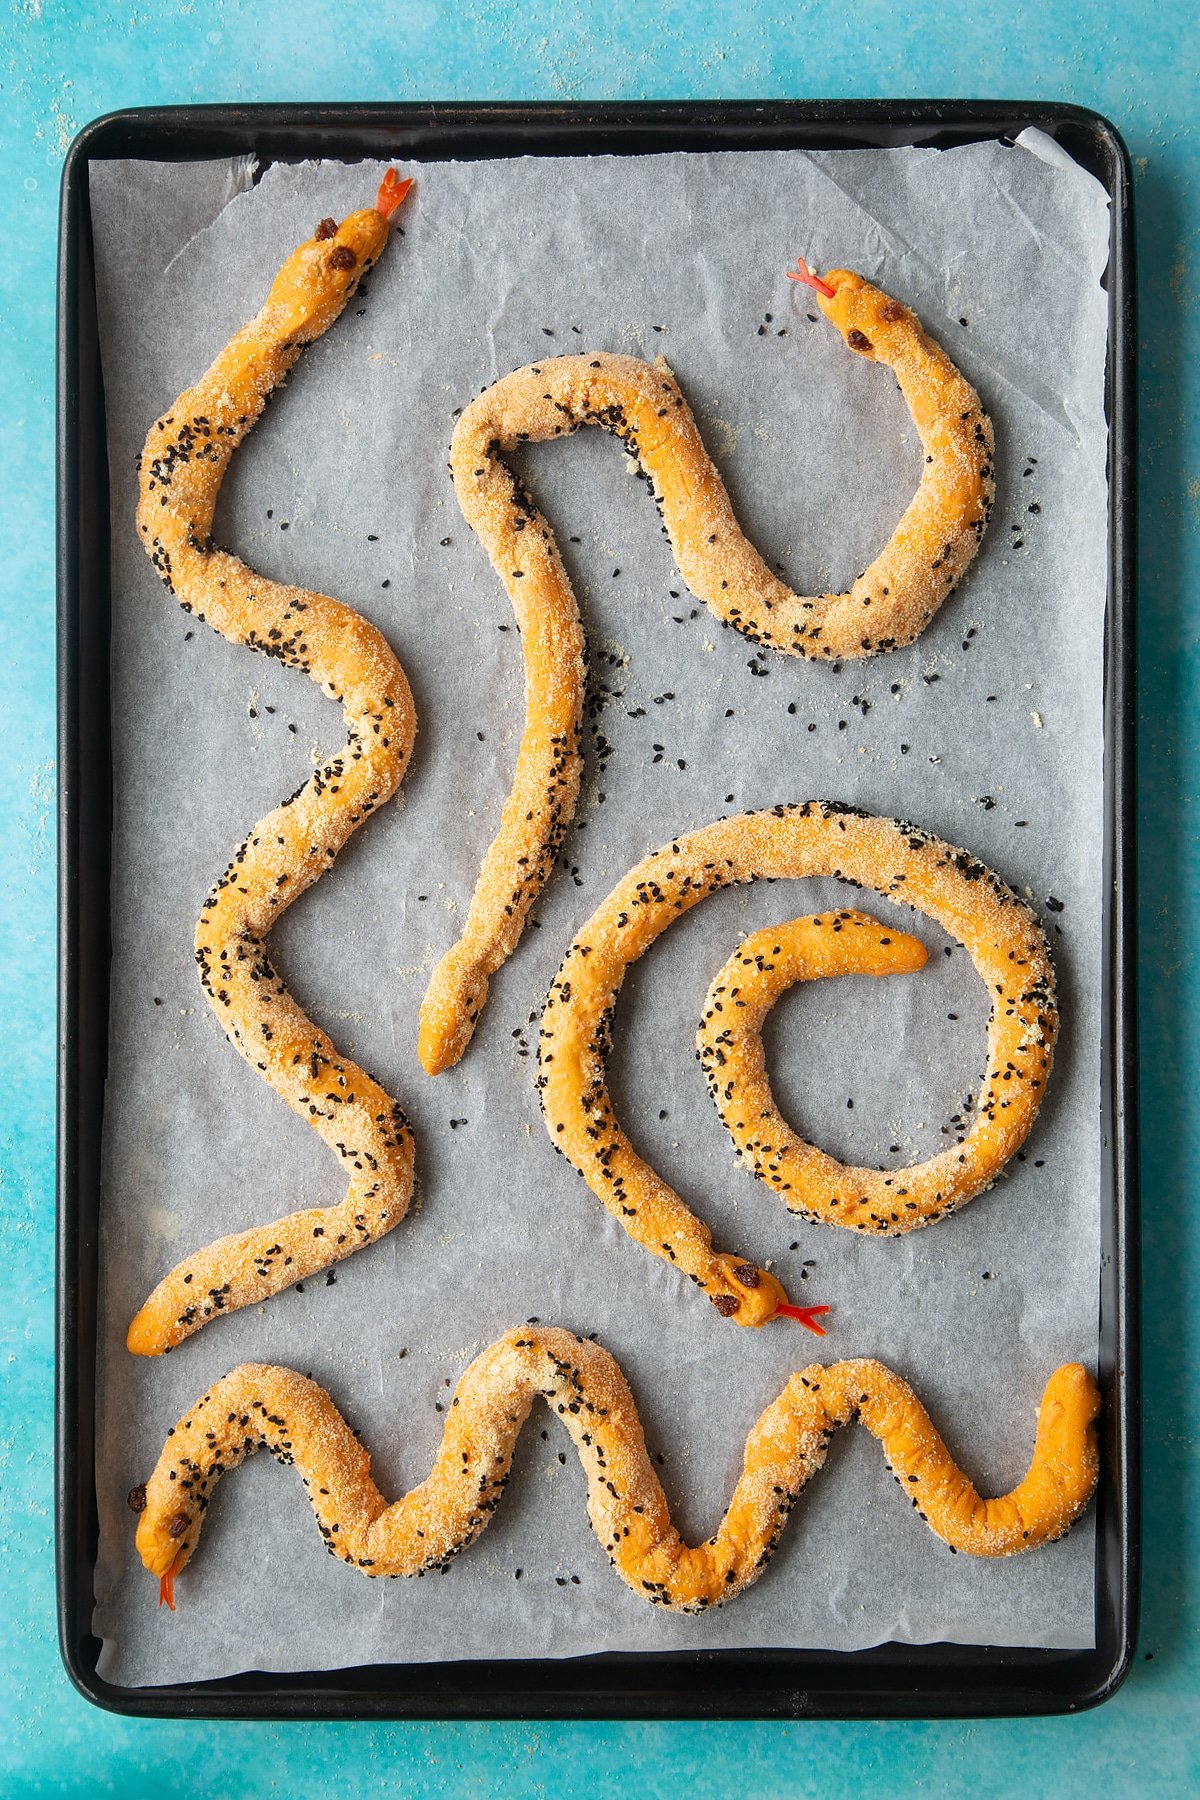 A lined baking tray with paprika and carrot bread dough rolled into a long sausage and decorated to look like snakes. 